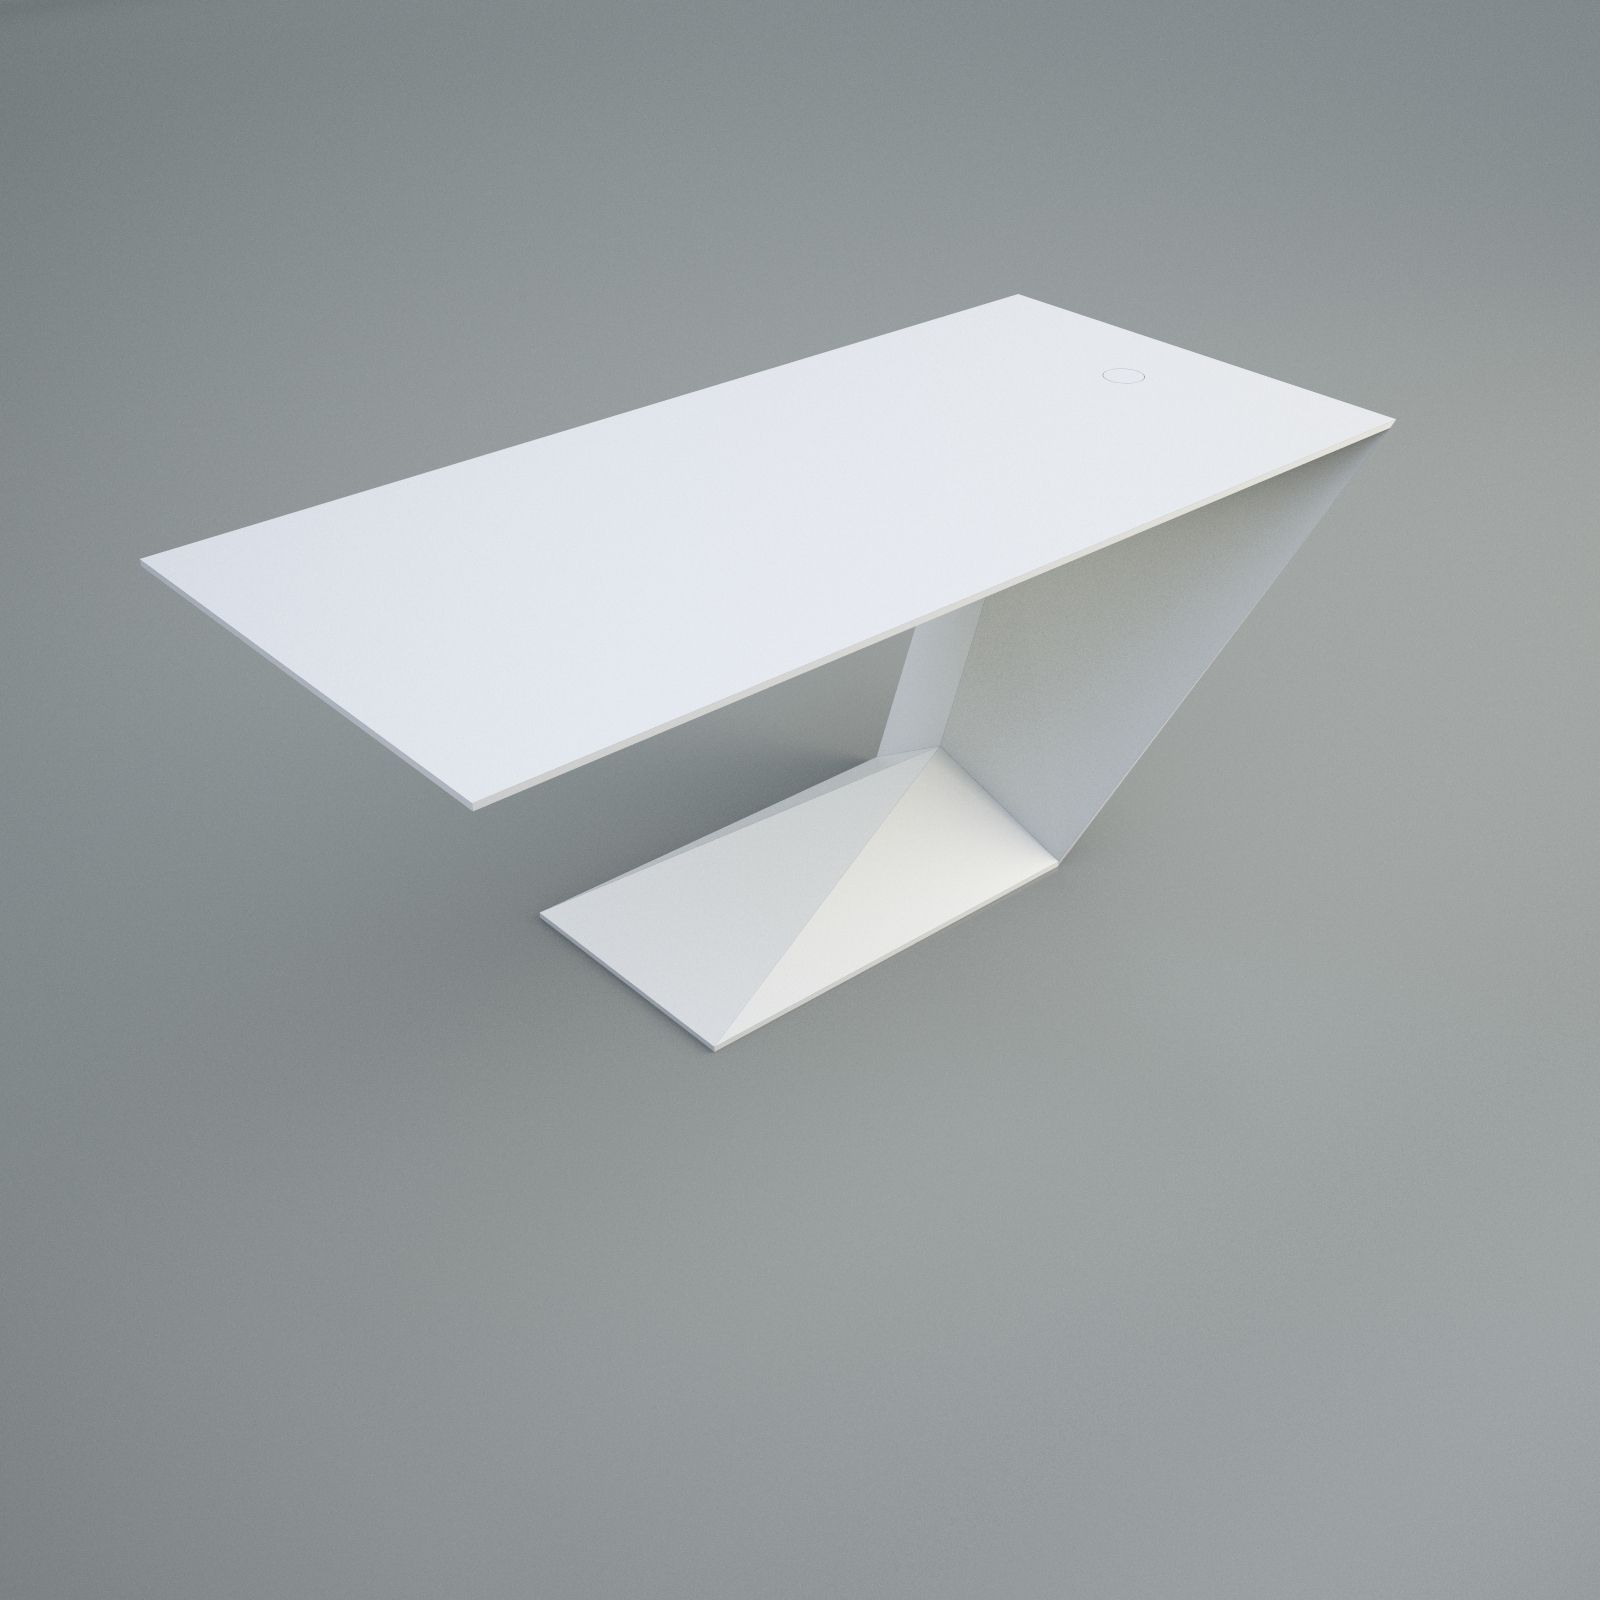 Z-shaped Office Table